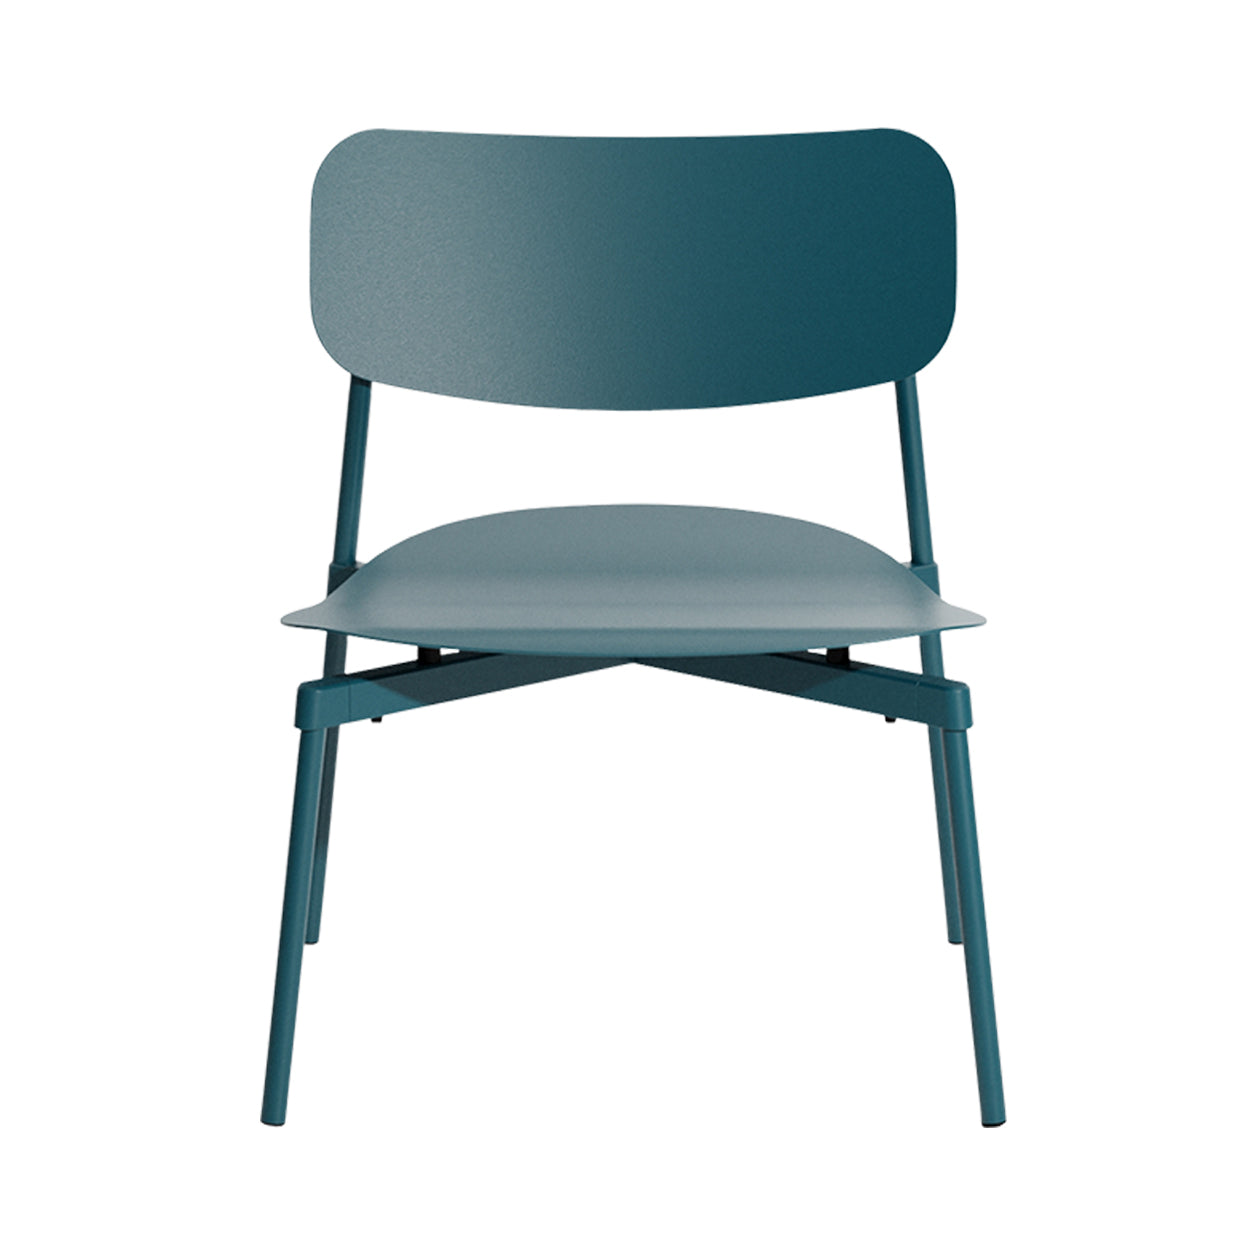 Fromme Stacking Lounge Chair: Ocean Blue